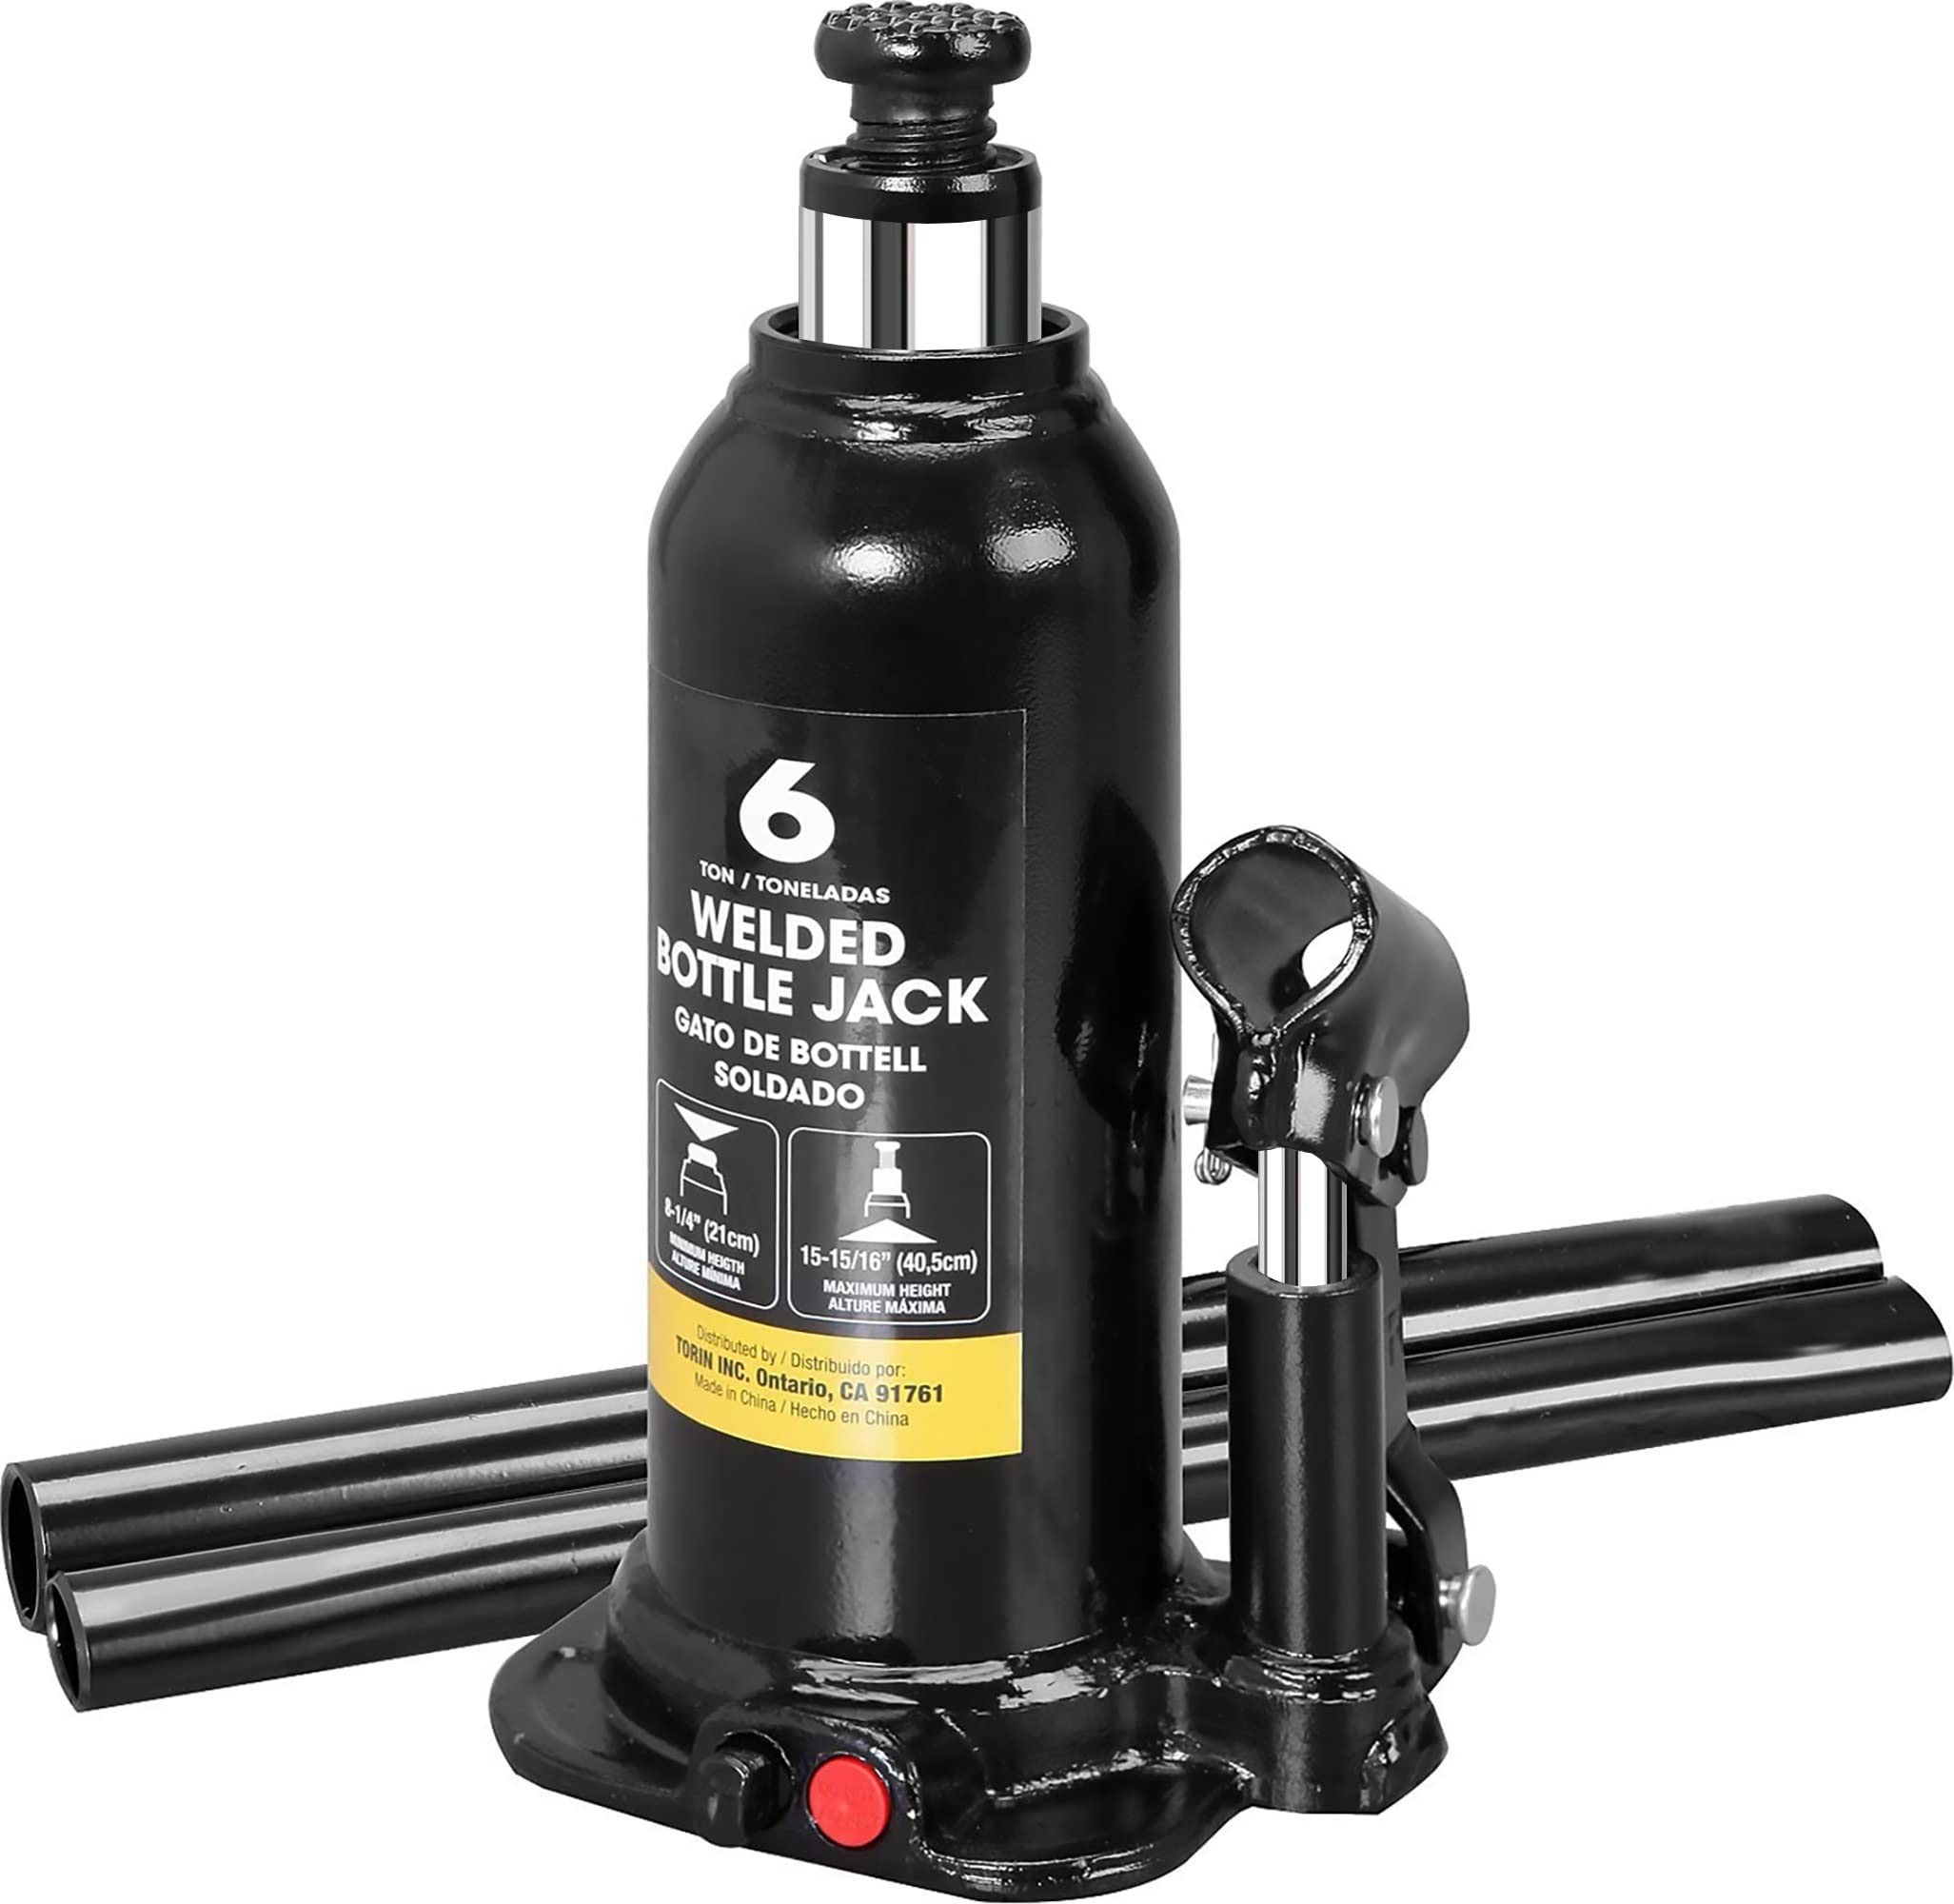 Torin 6 Ton (12,000 LBs) Capacity Hydraulic Welded Bottle Jack (Black) $21.10 + Free Shipping w/ Prime or on $35+